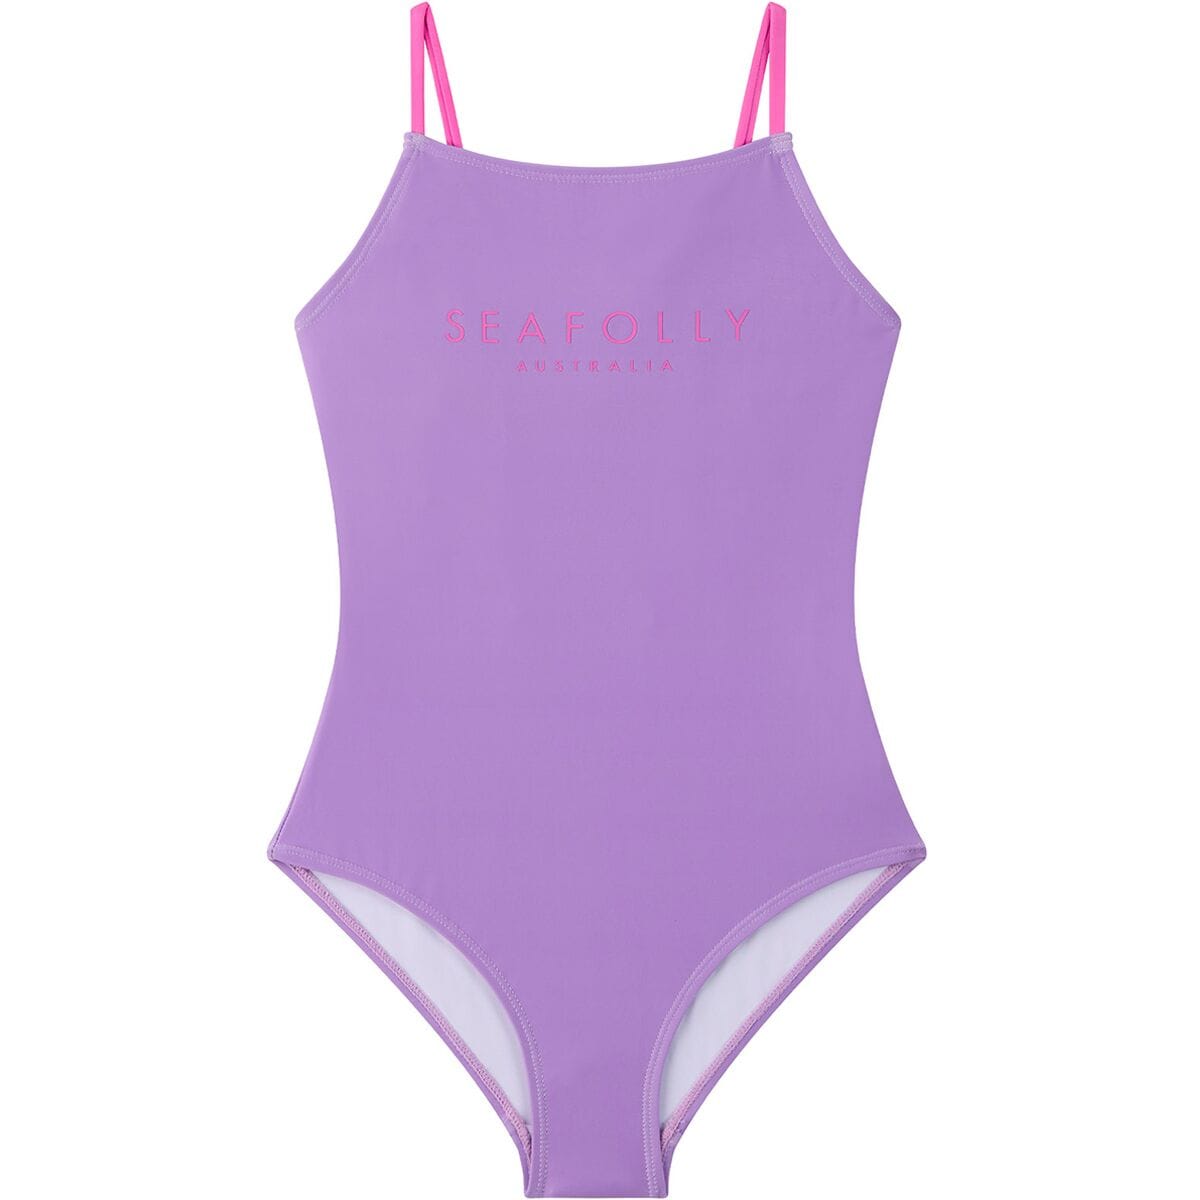 Seafolly Summer Solstice Square Neck One-Piece Swimsuit - Girls'